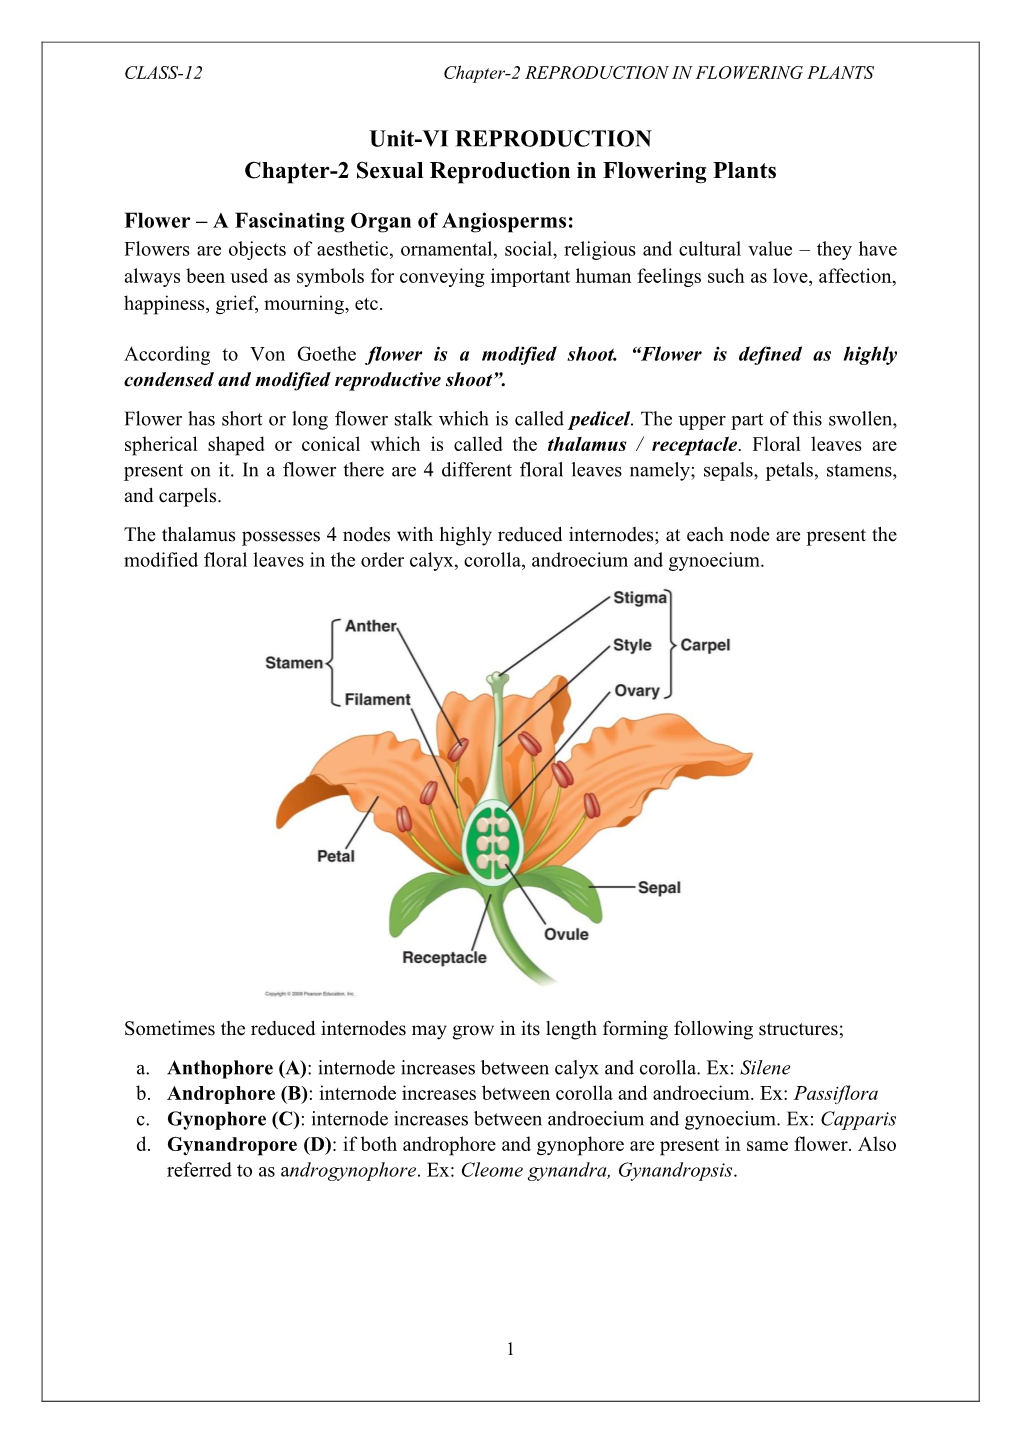 Unit-VI REPRODUCTION Chapter-2 Sexual Reproduction in Flowering Plants